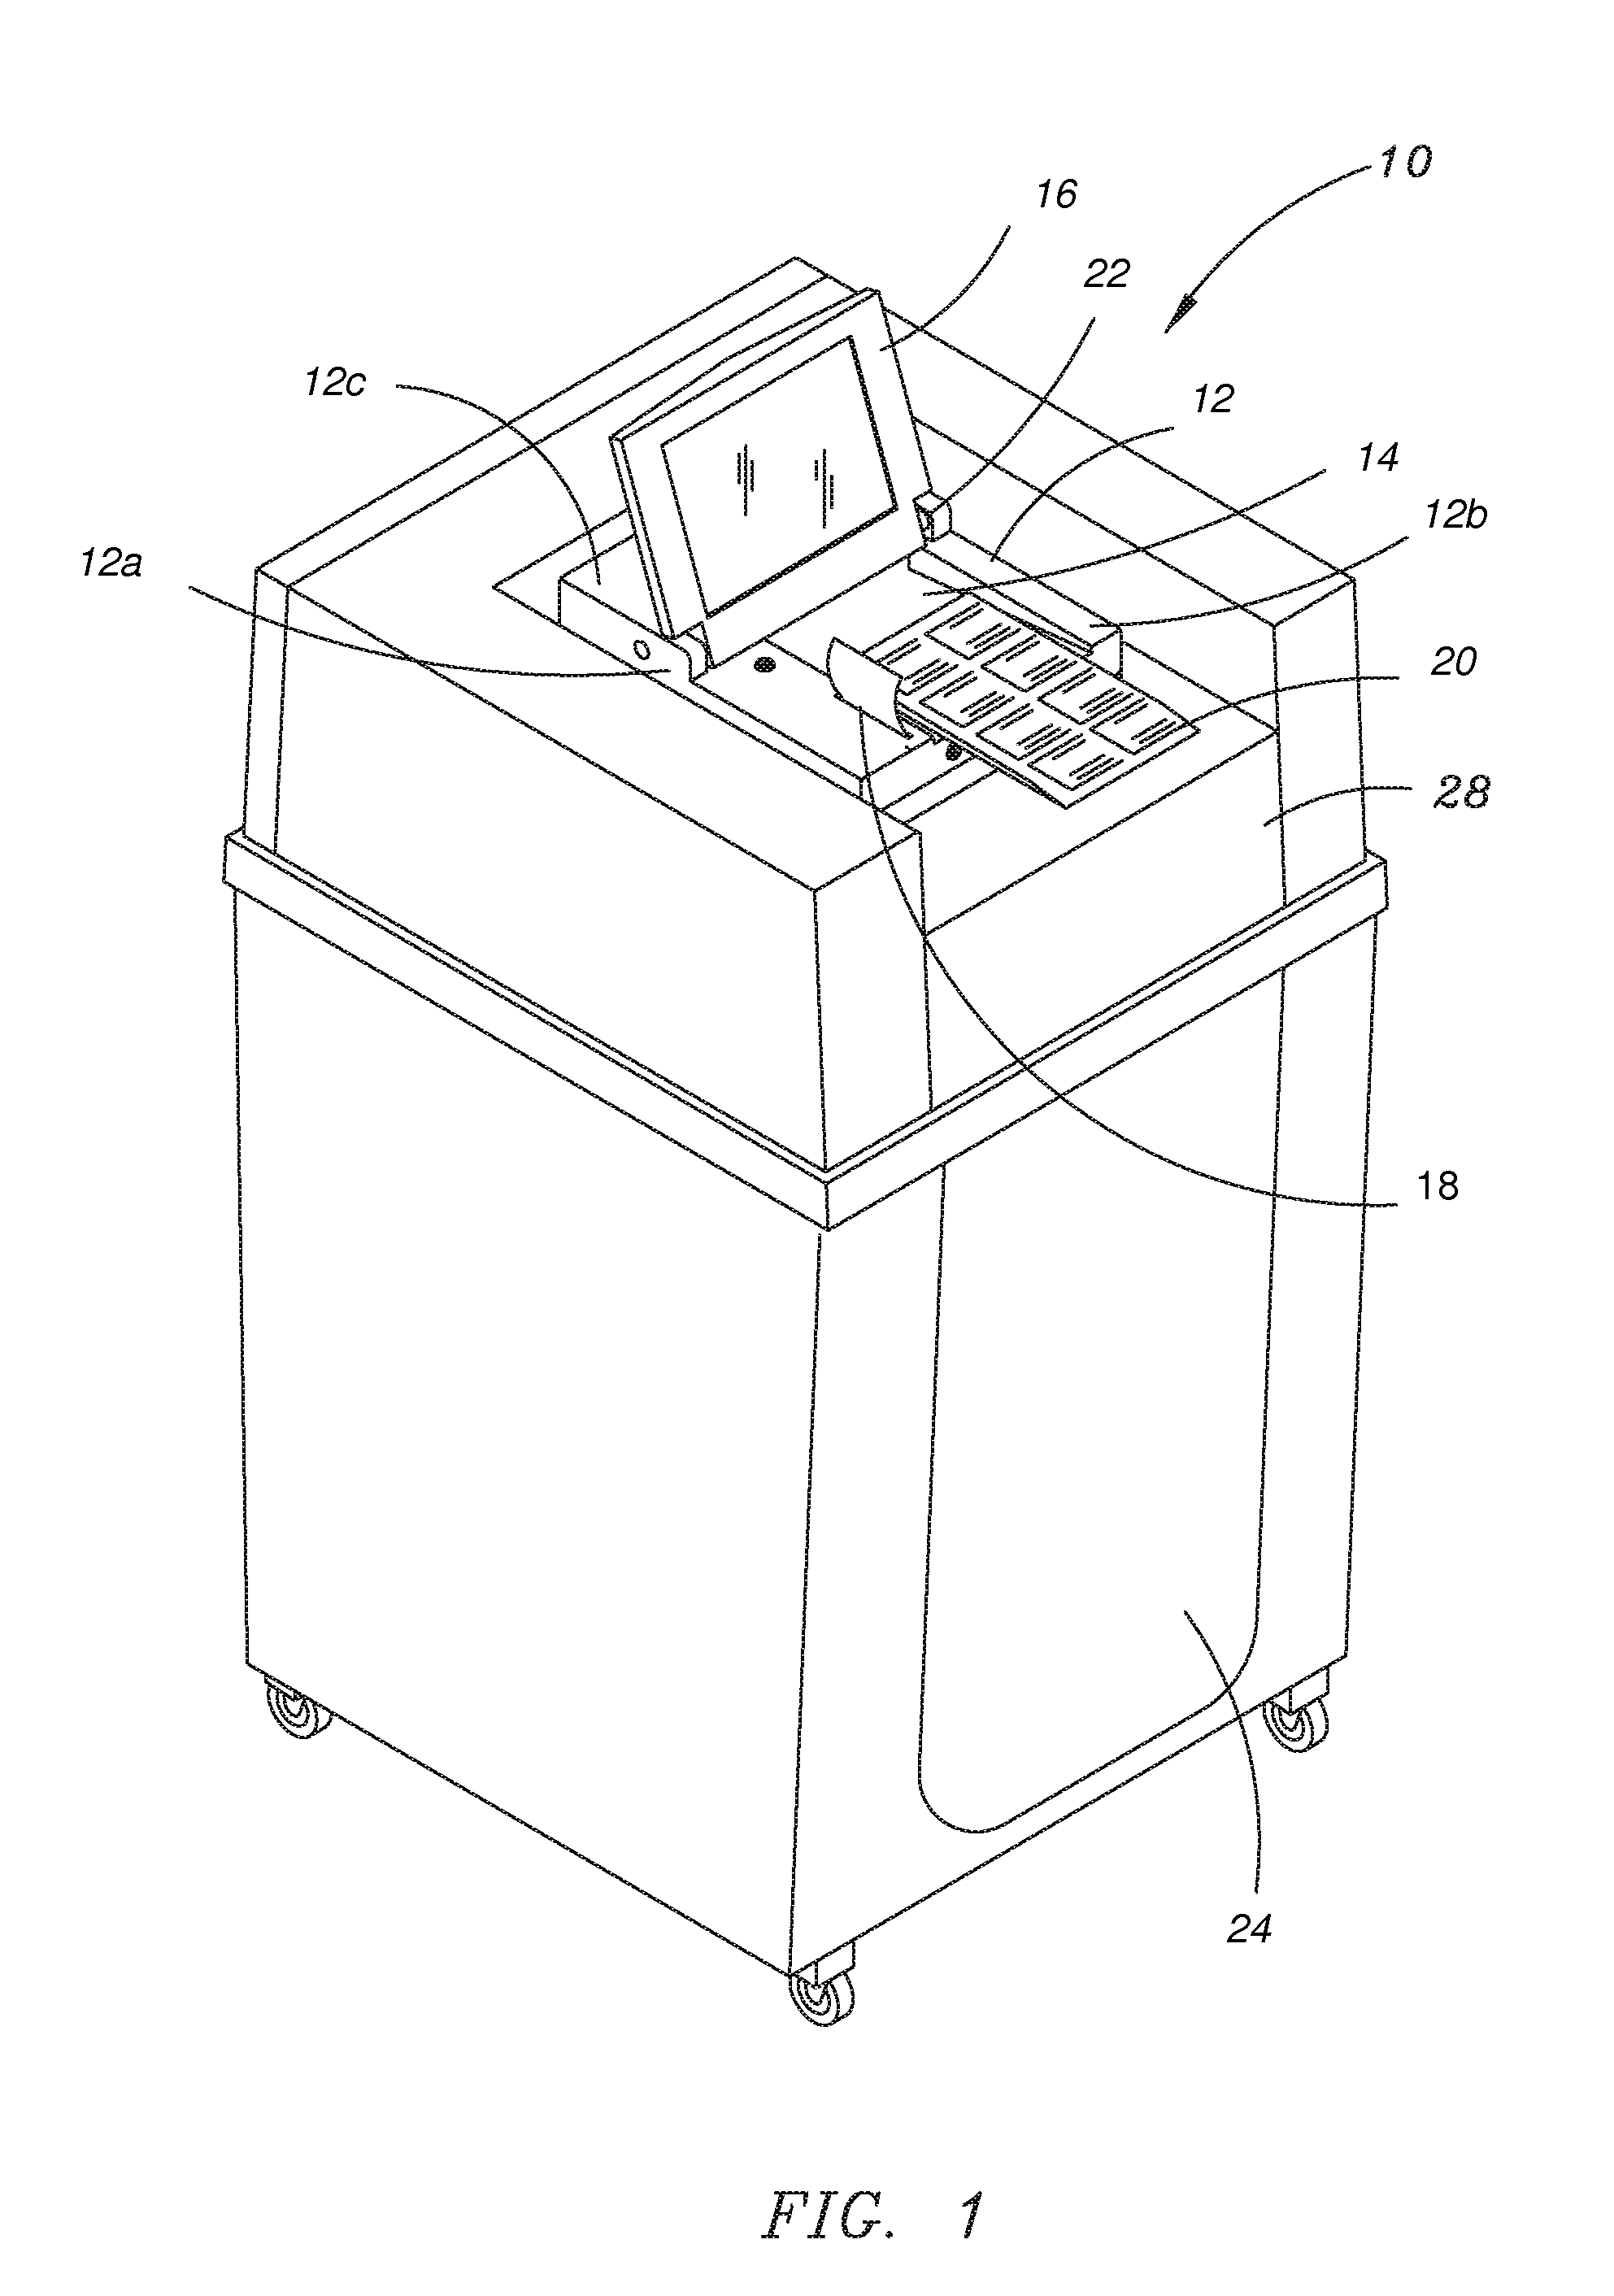 System and Method for Monitoring Precinct-Based Ballot Tabulation Devices